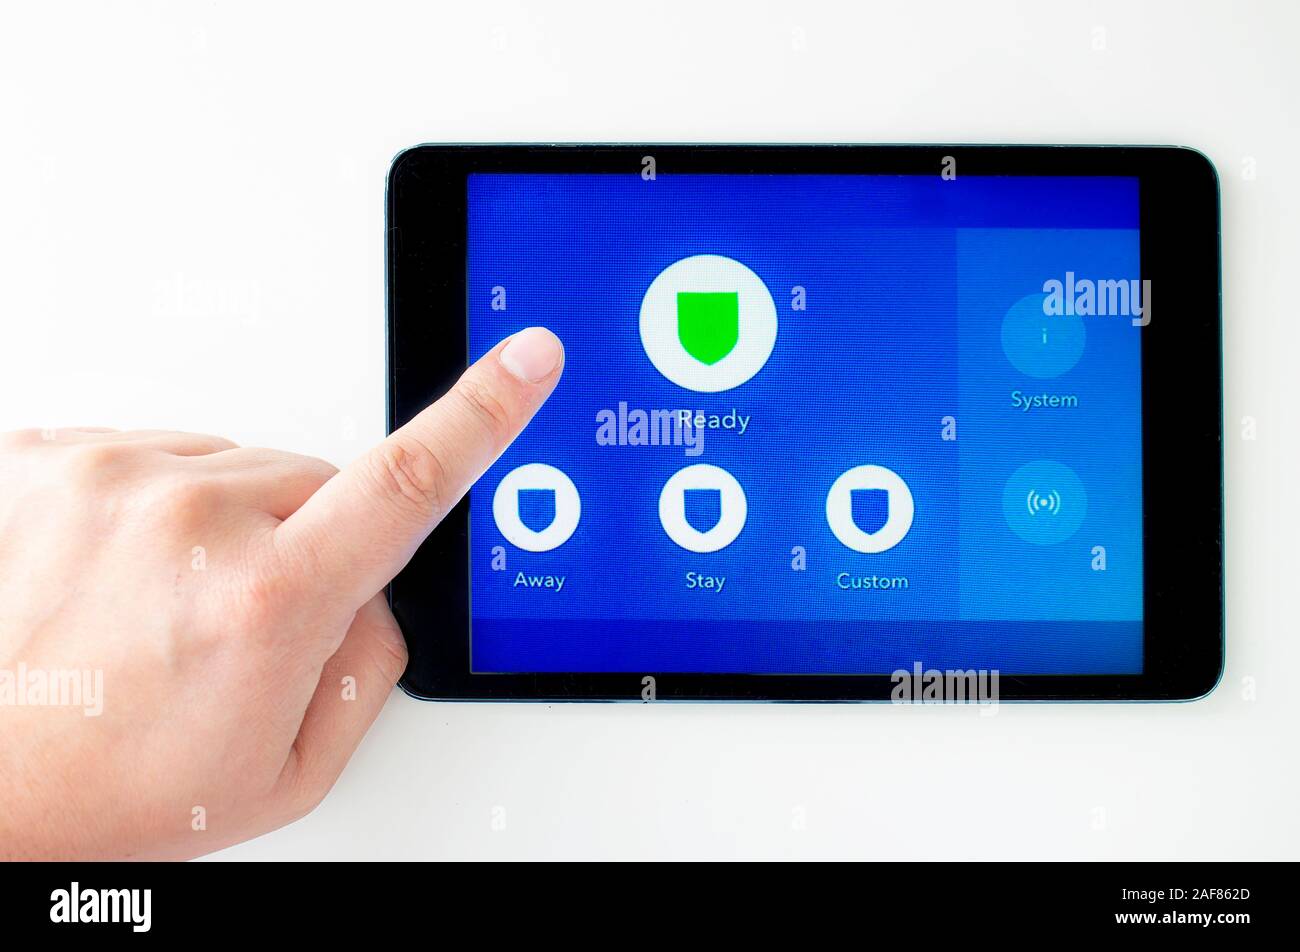 Digital Touch Screen Home Alarm Panel to control security system with a person's hand/finger Stock Photo